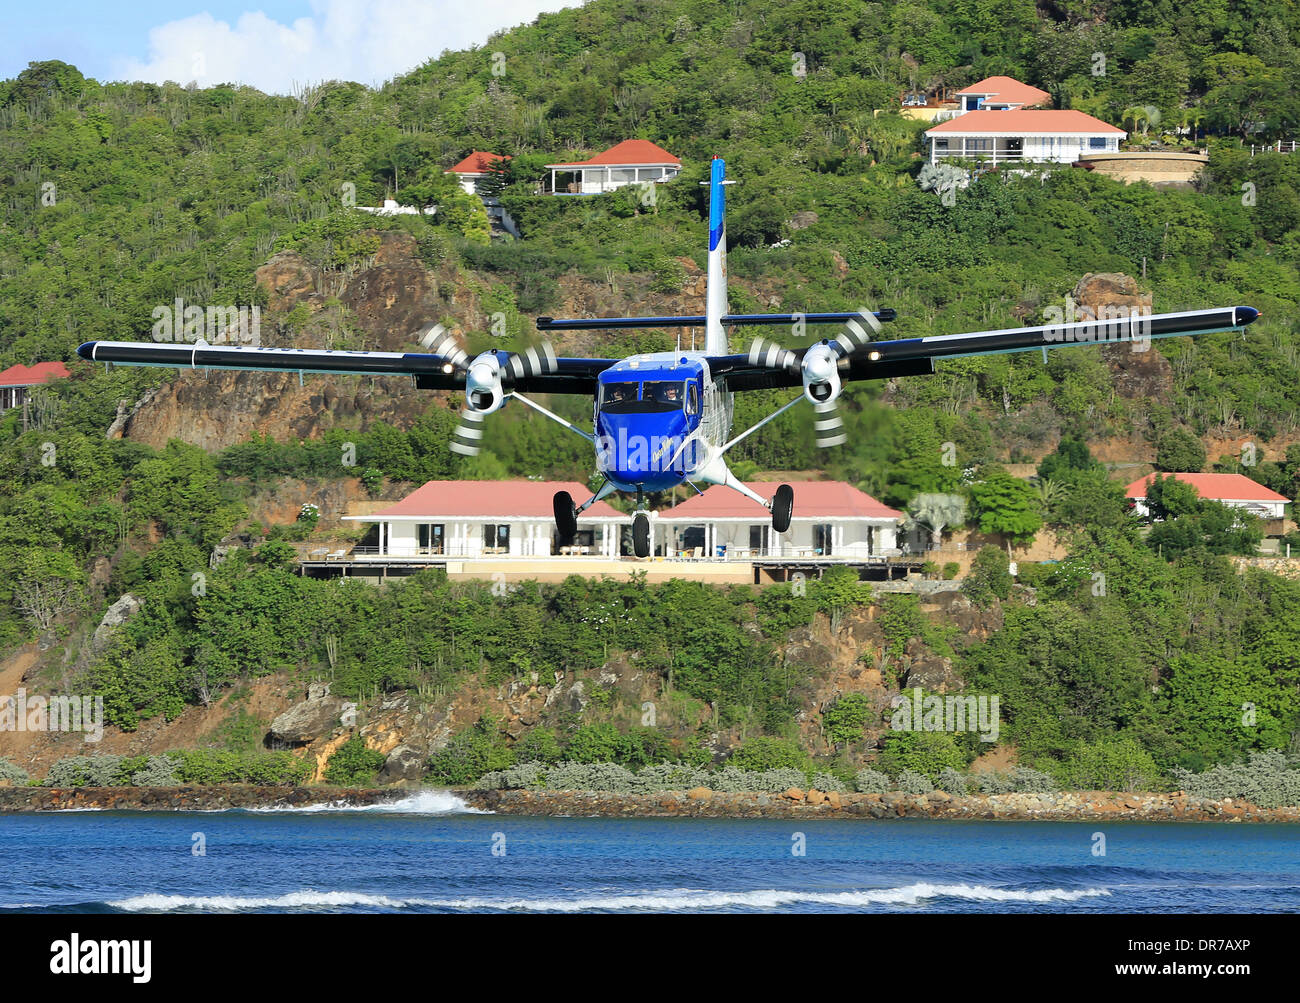 A Winair Twin Otter from St. Martin on short finals to Runway 28 at St. Barth's. Stock Photo